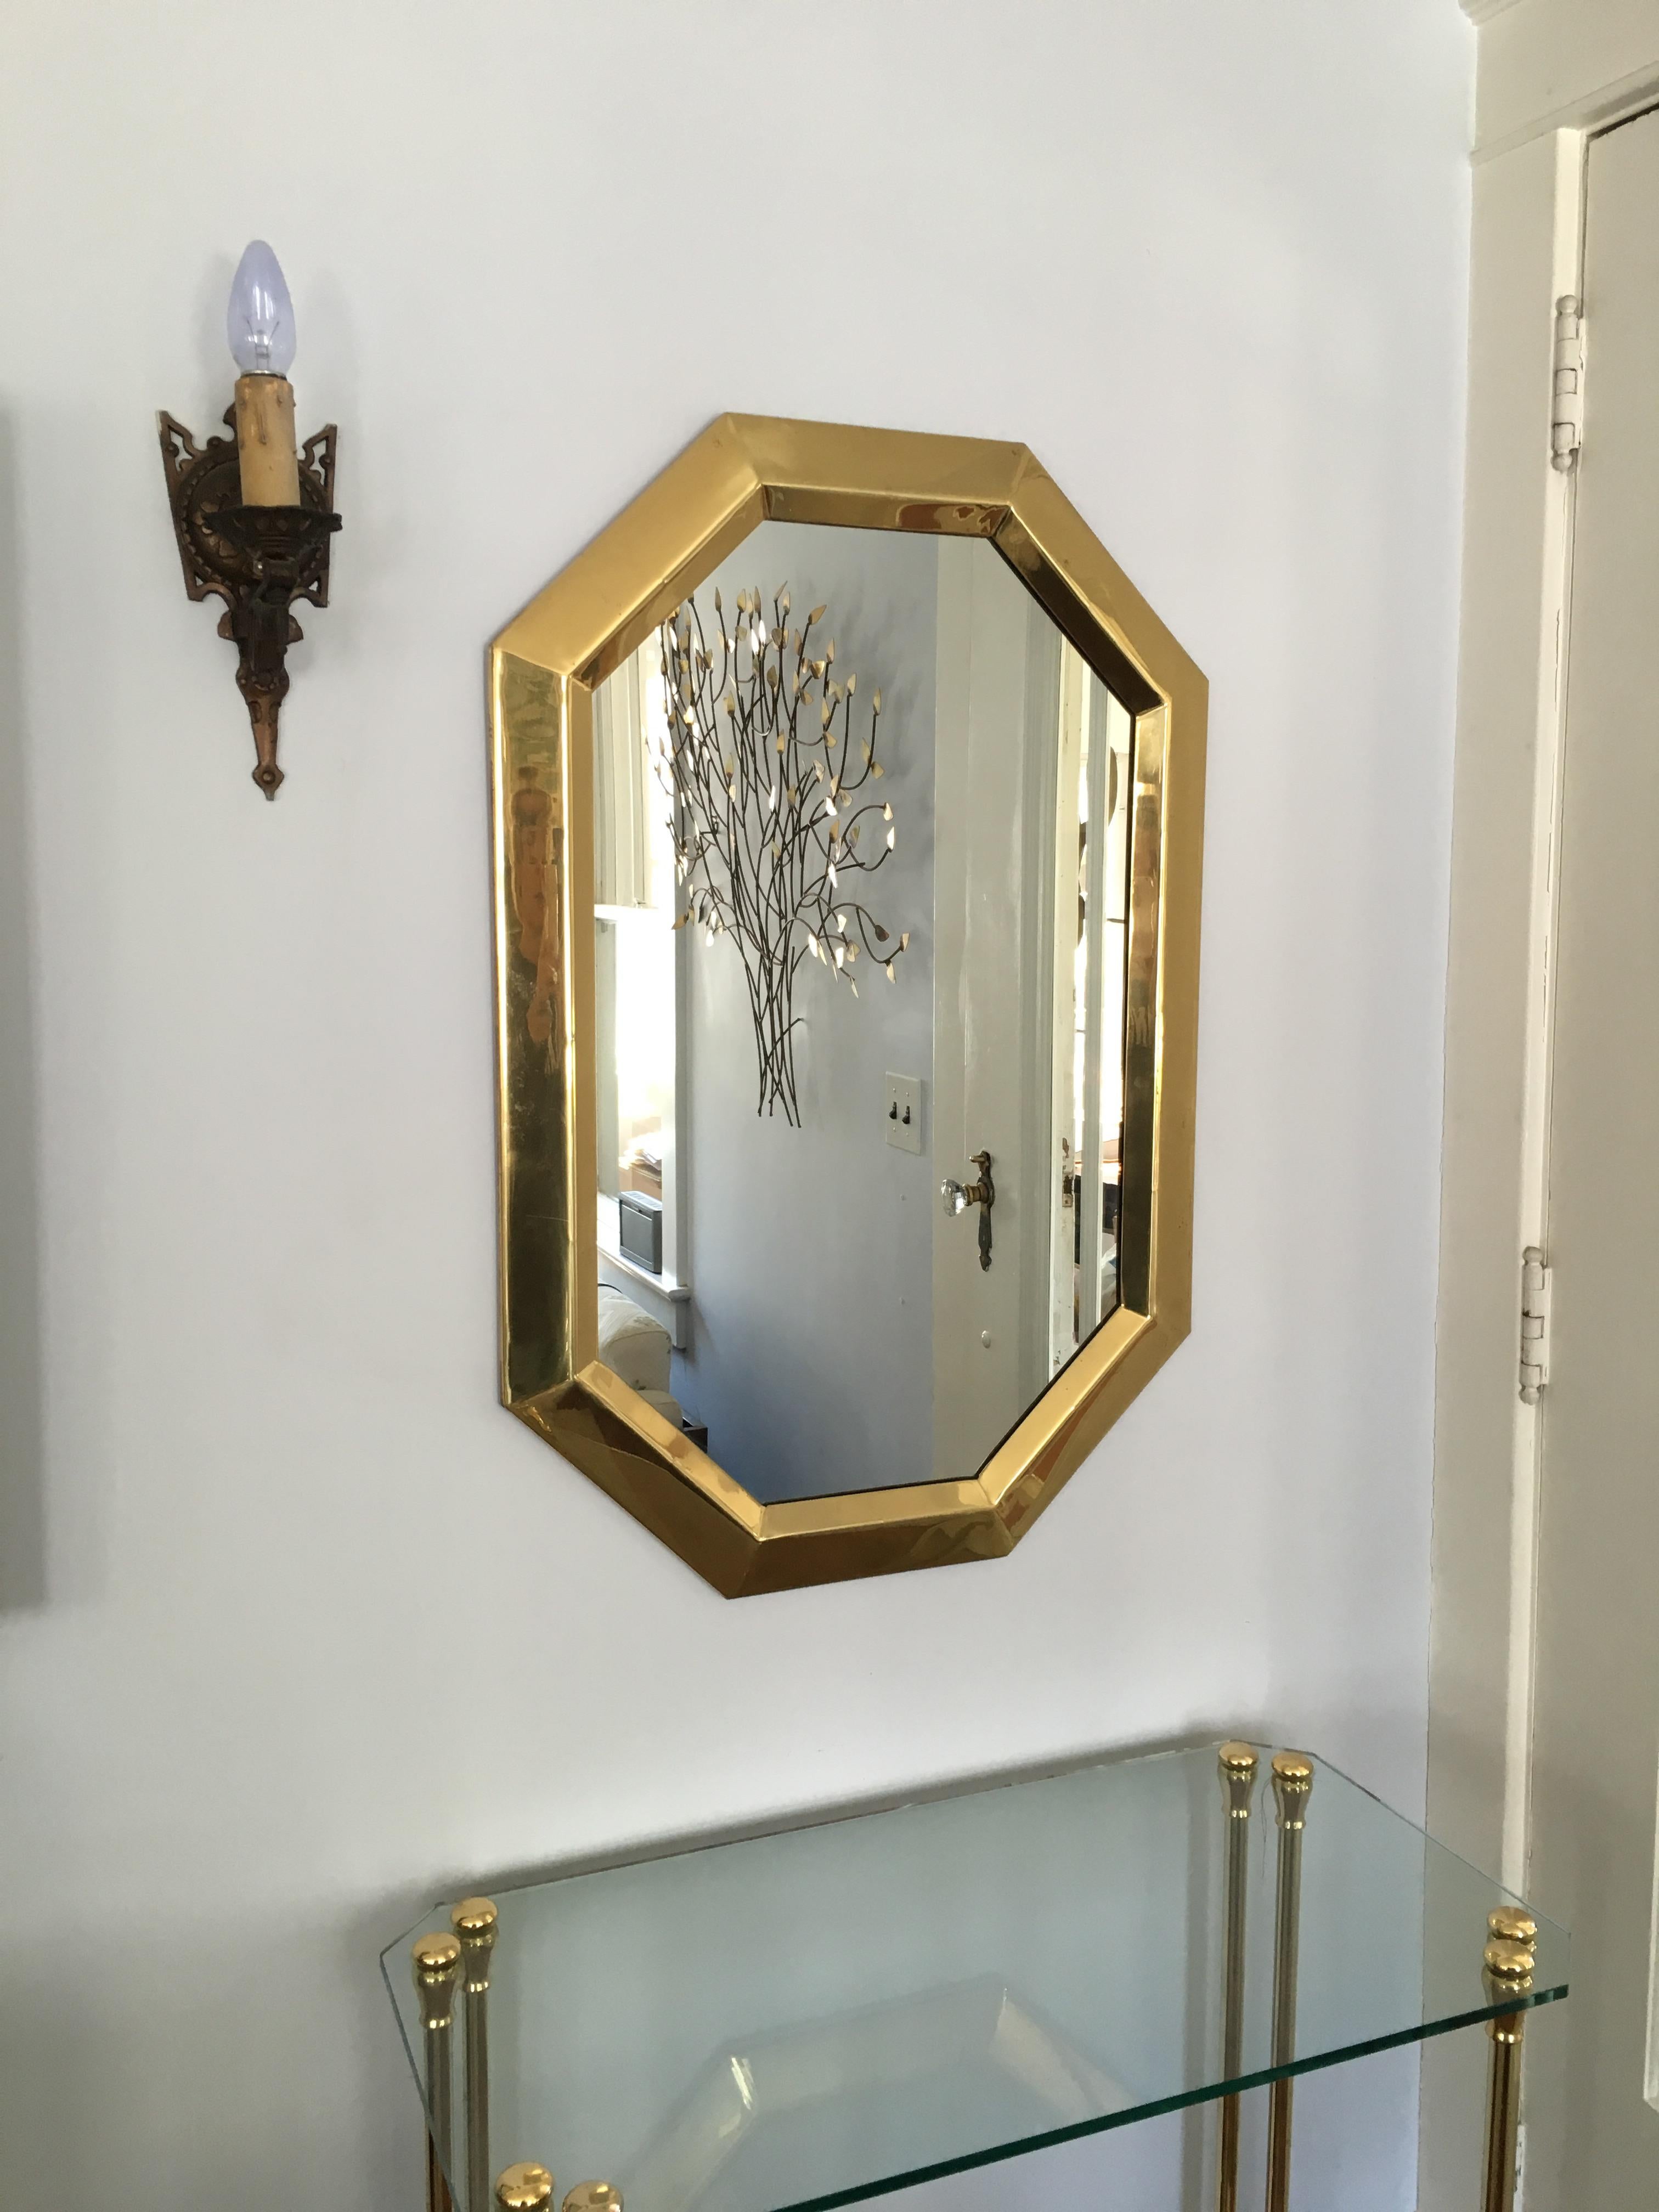 Beautiful classic lines in this brass mirror in the manner of Mastercraft. Mid size mirror enhances any wall in its timeless design. Typical wear.